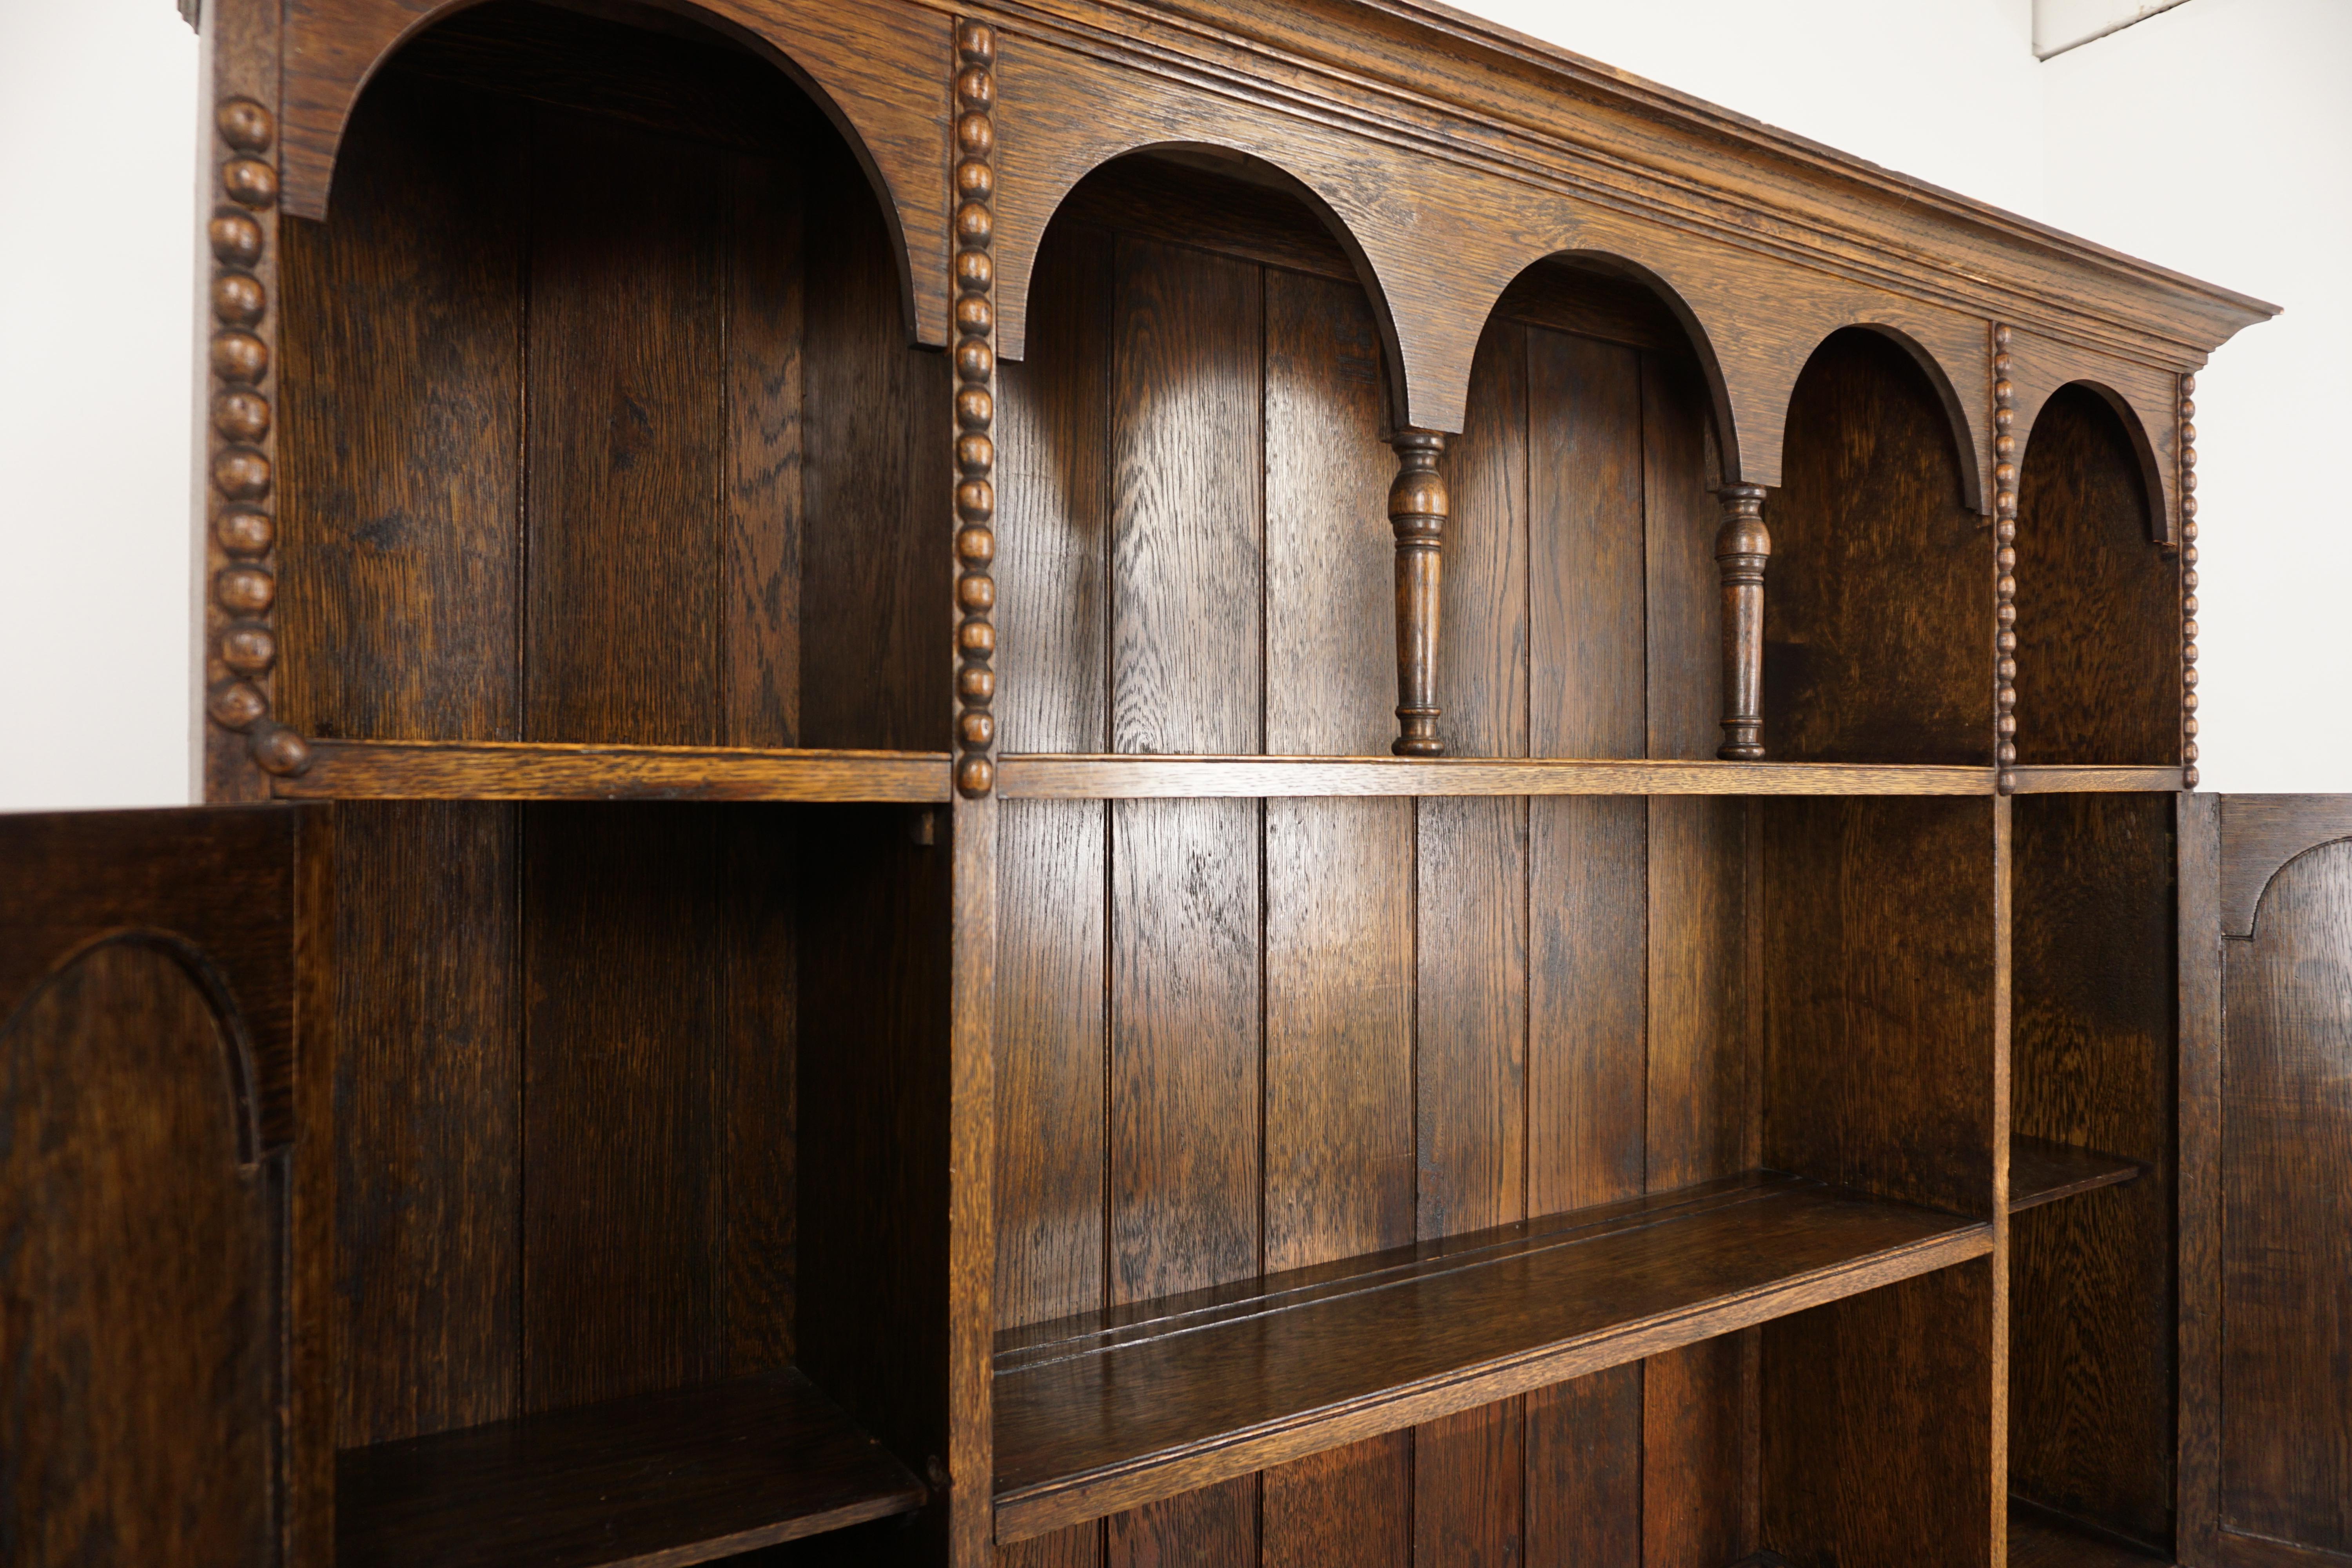 Early 20th Century Antique Oak Dresser, Welsh Buffet, Hutch, and Sideboard, Scotland 1900, H1040